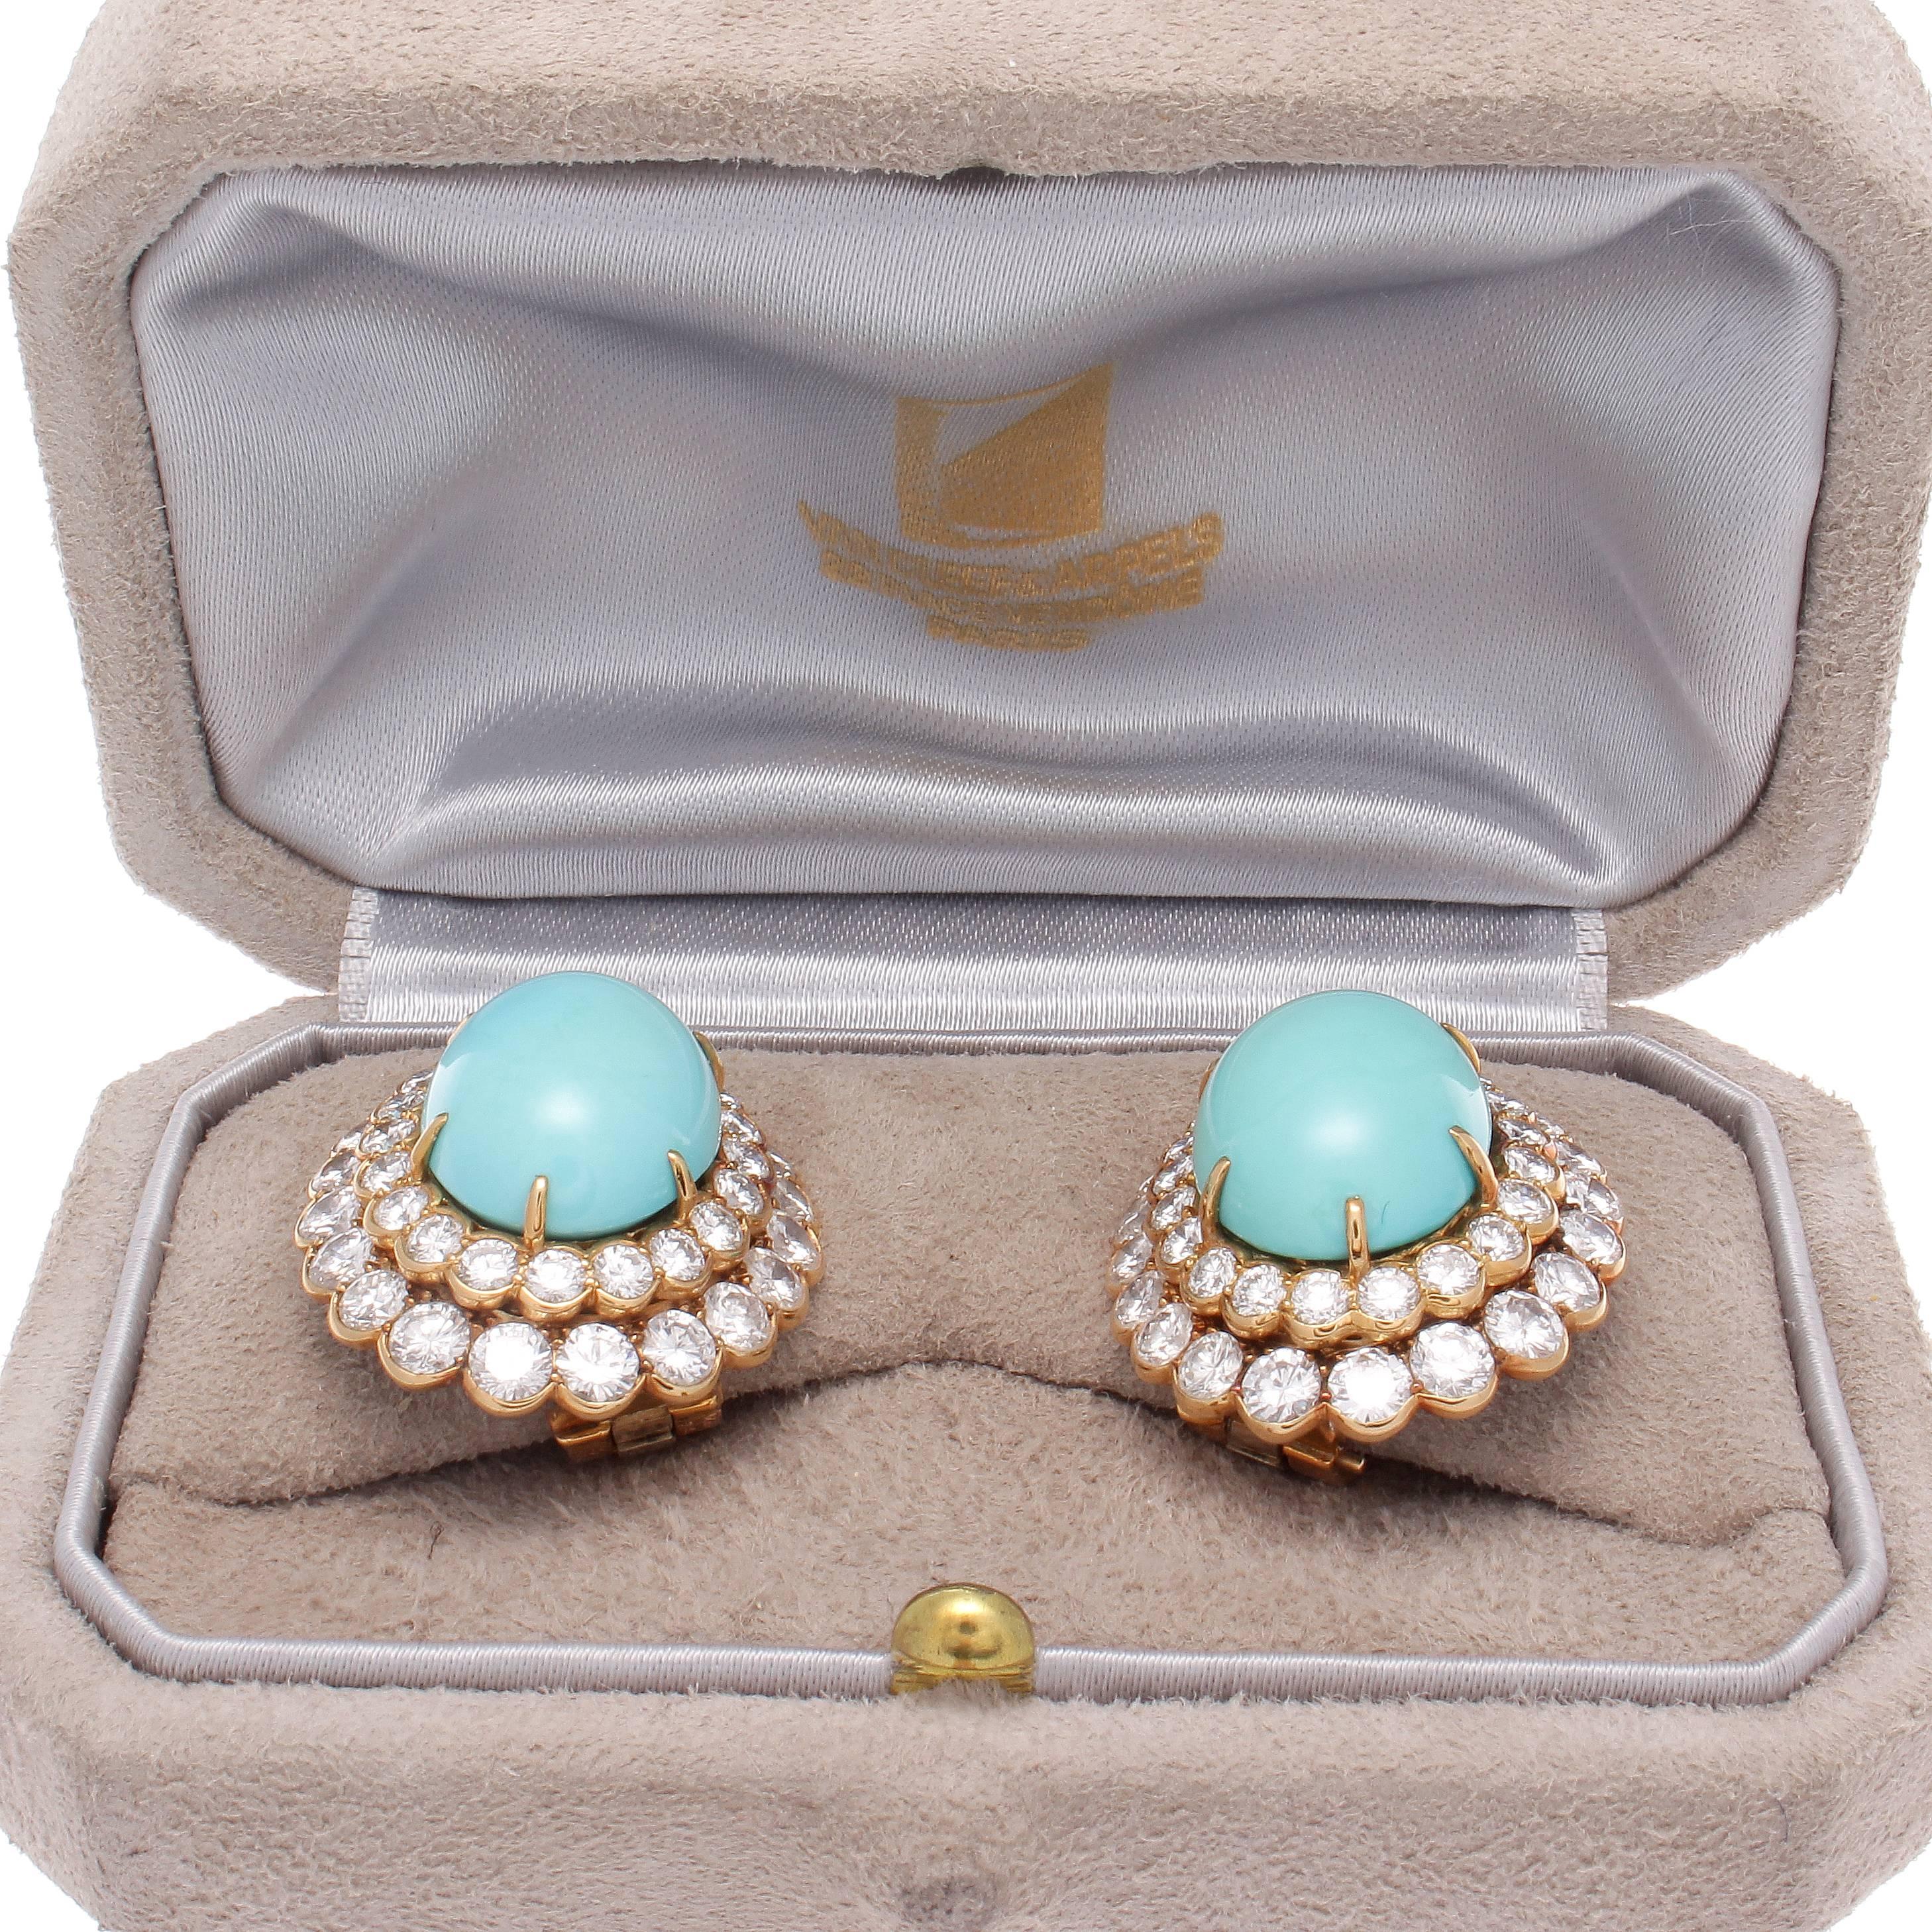 Superior craftsmanship from Van Cleef & Arpels. Created with two large vibrant cabochon turquoise that is surrounded by cascading halos of near colorless diamonds weighing approximately 8 carats total. Hand crafted in 18k yellow gold. Signed VCA,